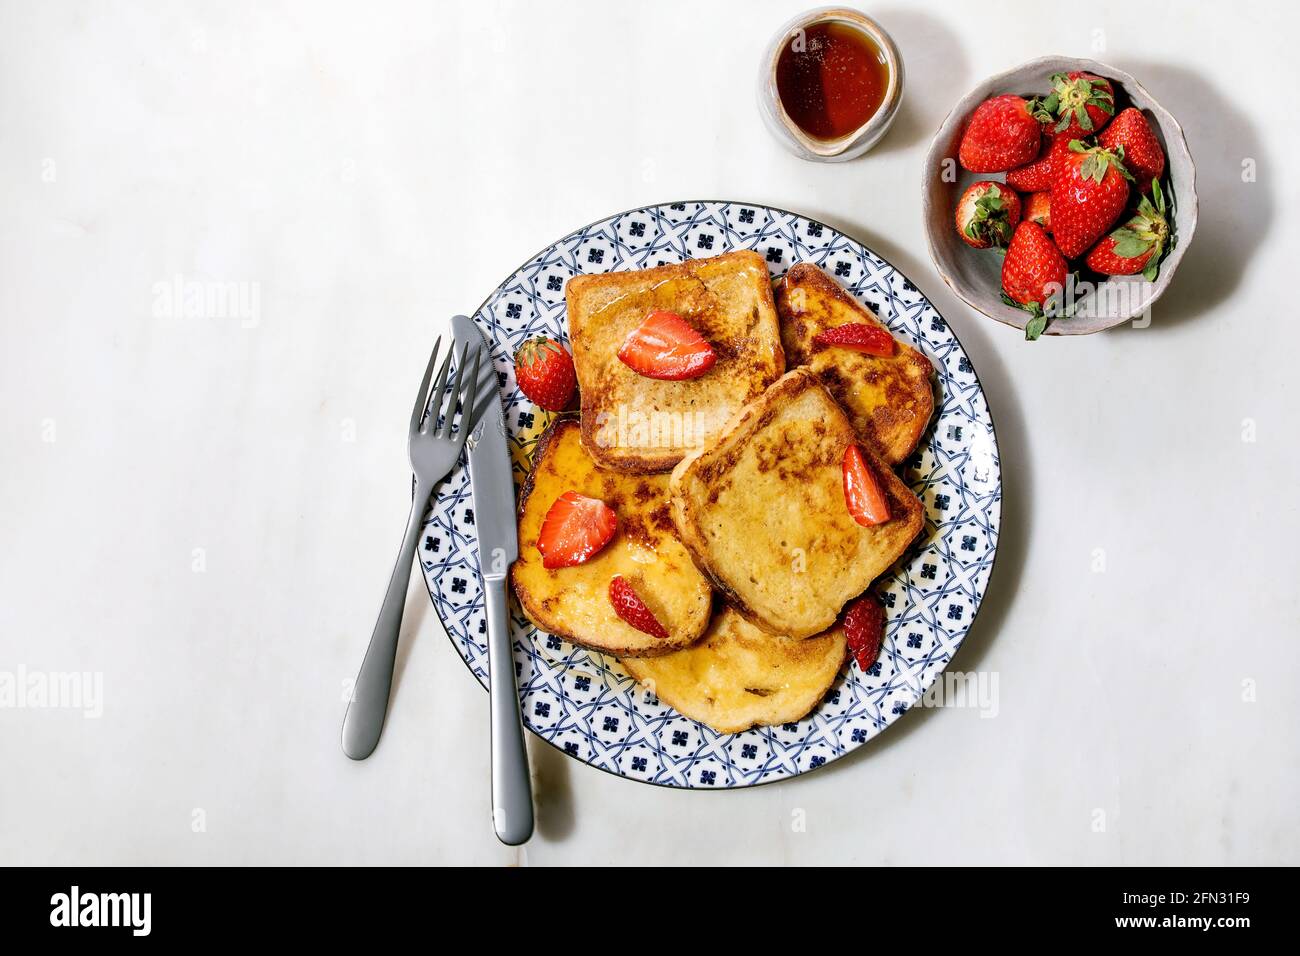 Stockpile of french toasts with fresh strawberries Stock Photo